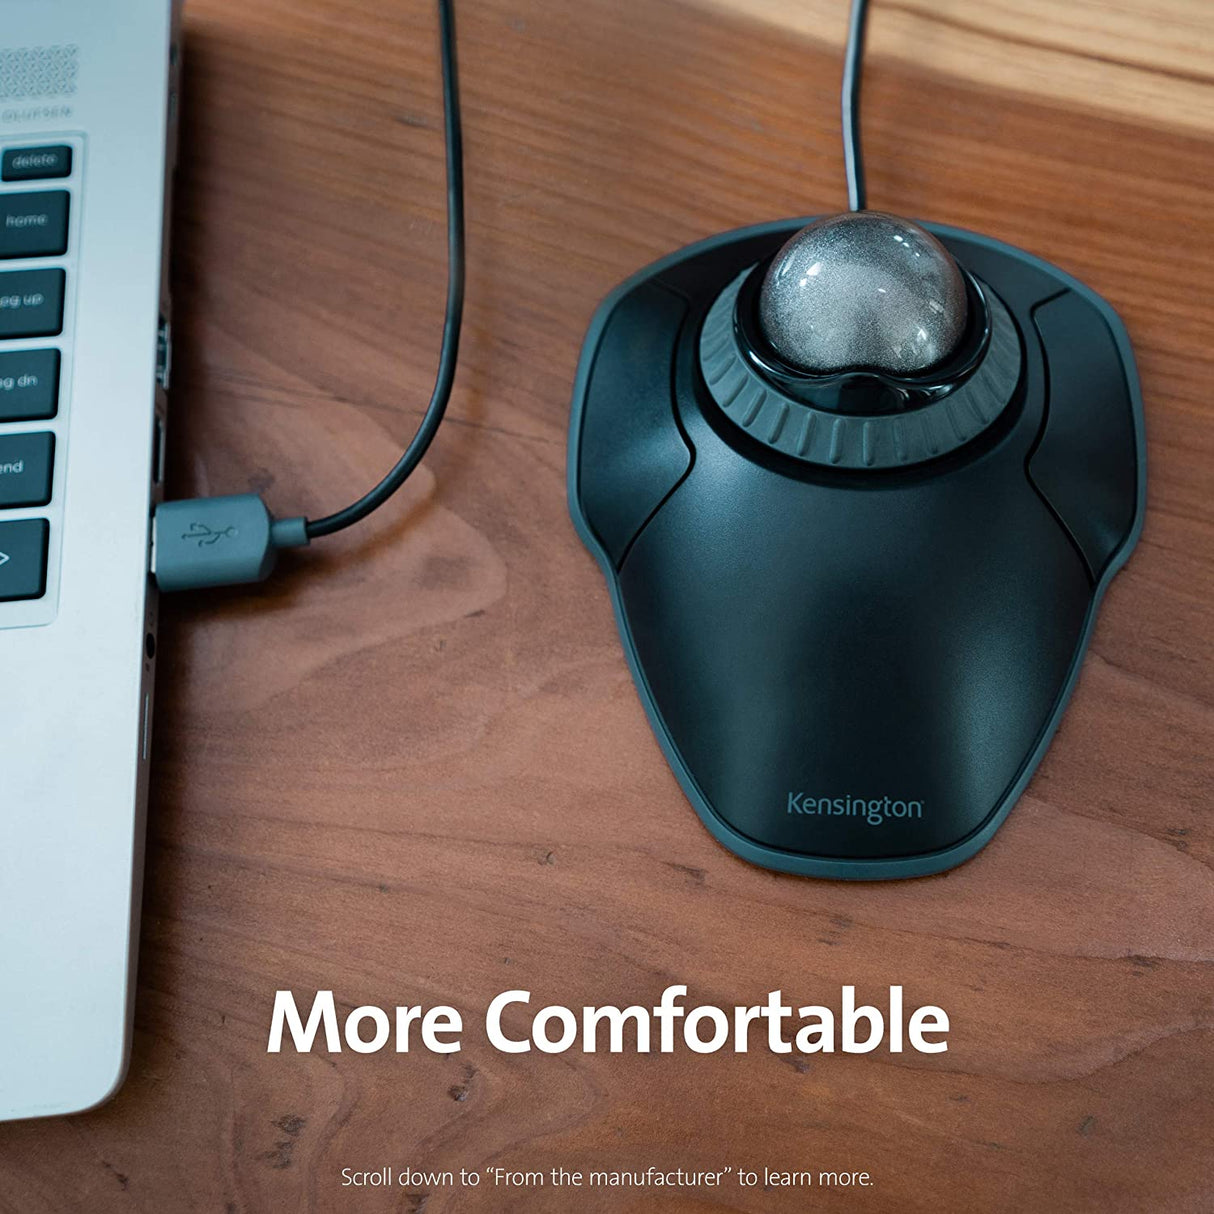 Kensington Orbit Trackball Mouse with Scroll Ring - Finger Control Ergonomic Mouse with Programmable Buttons, Precise Optical Control for Windows and MacOS - Space Gray (K75327WW) Black-Gray Wired